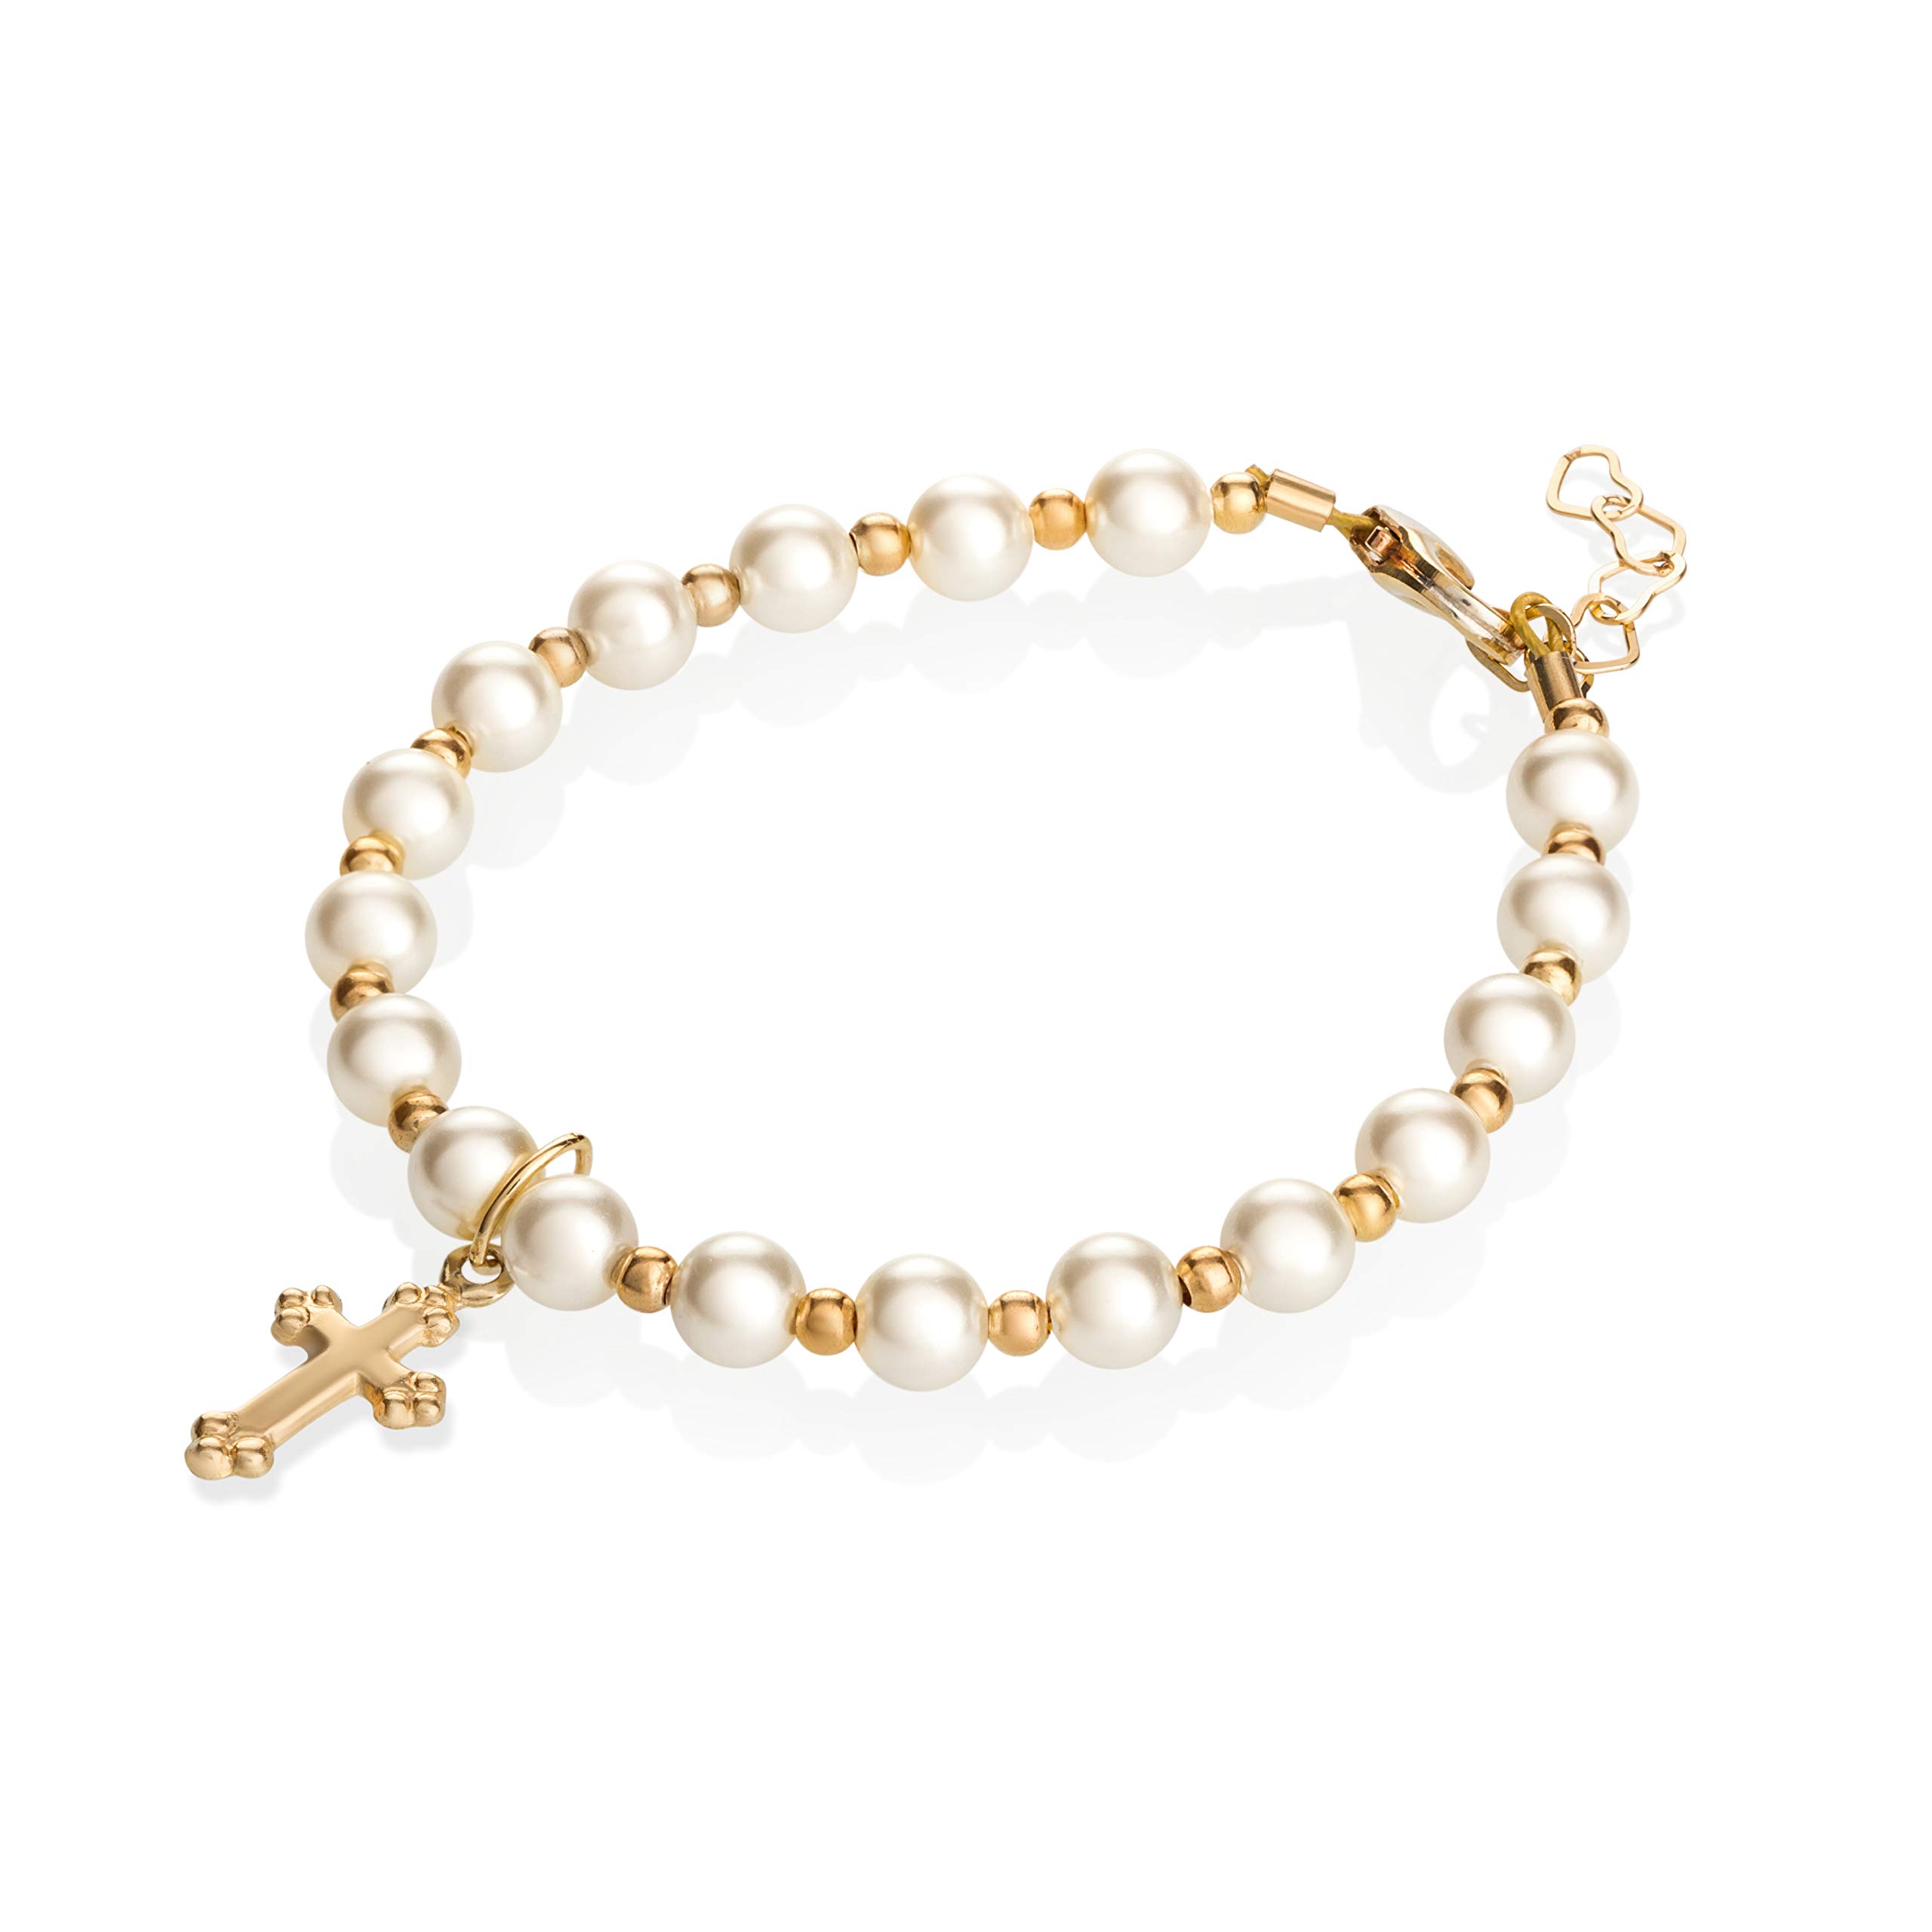 Christening 14KT Gold-Filled Beads with Cream European Simulated Pearls and Cross Charm Luxury Unisex Baby Bracelet (BGC)